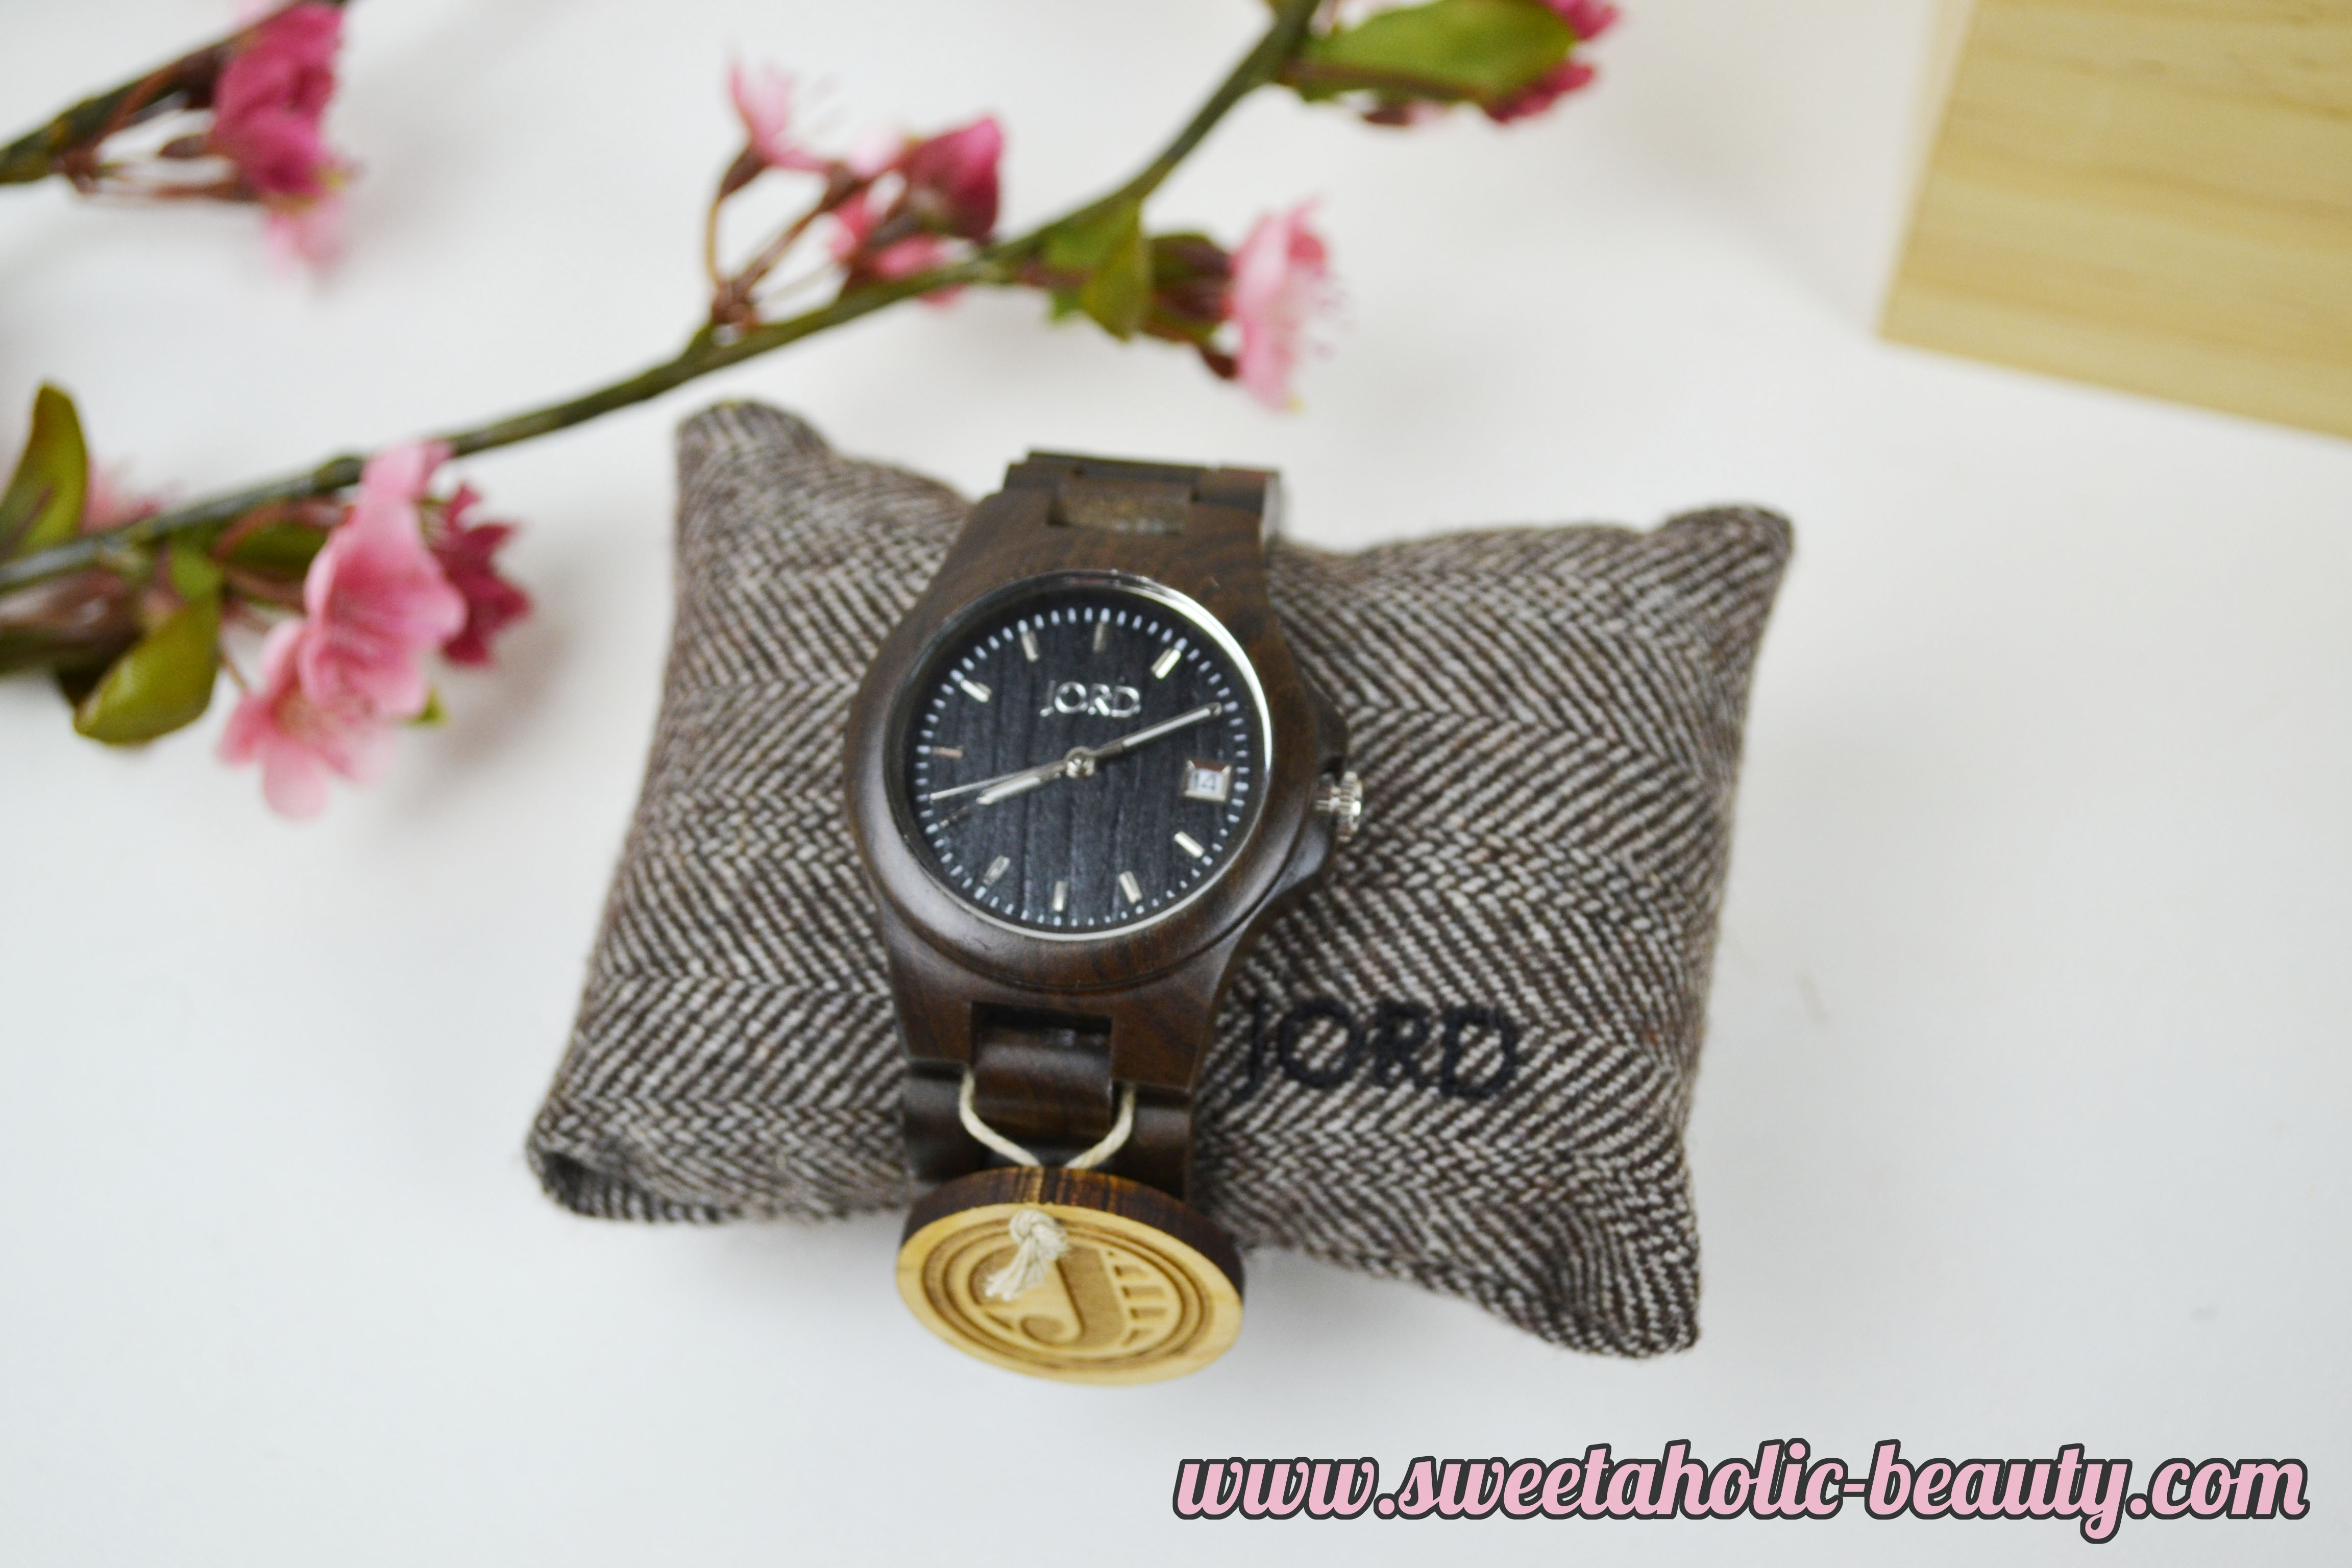 Jord Wood Watches Review - Sweetaholic Beauty